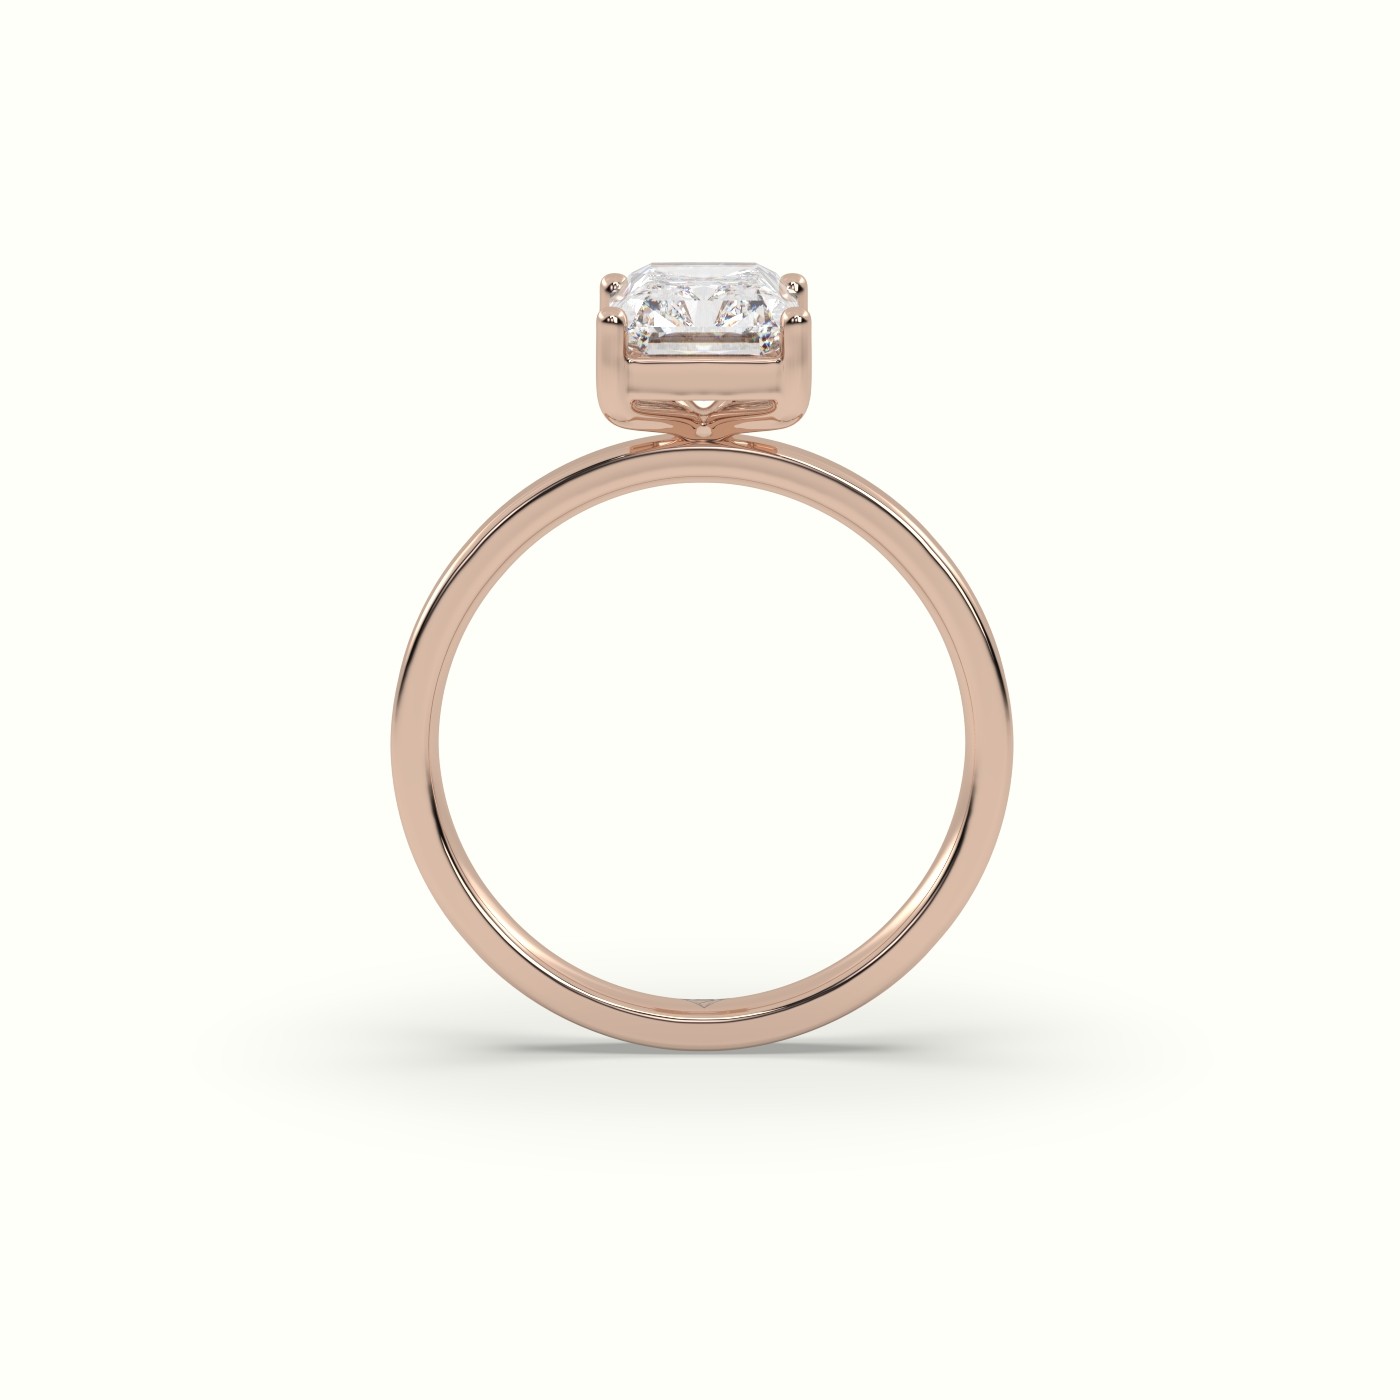 18K ROSE GOLD Radiant Cut Solitaire Diamond Ring Precious Jewels Antwerp Radiance